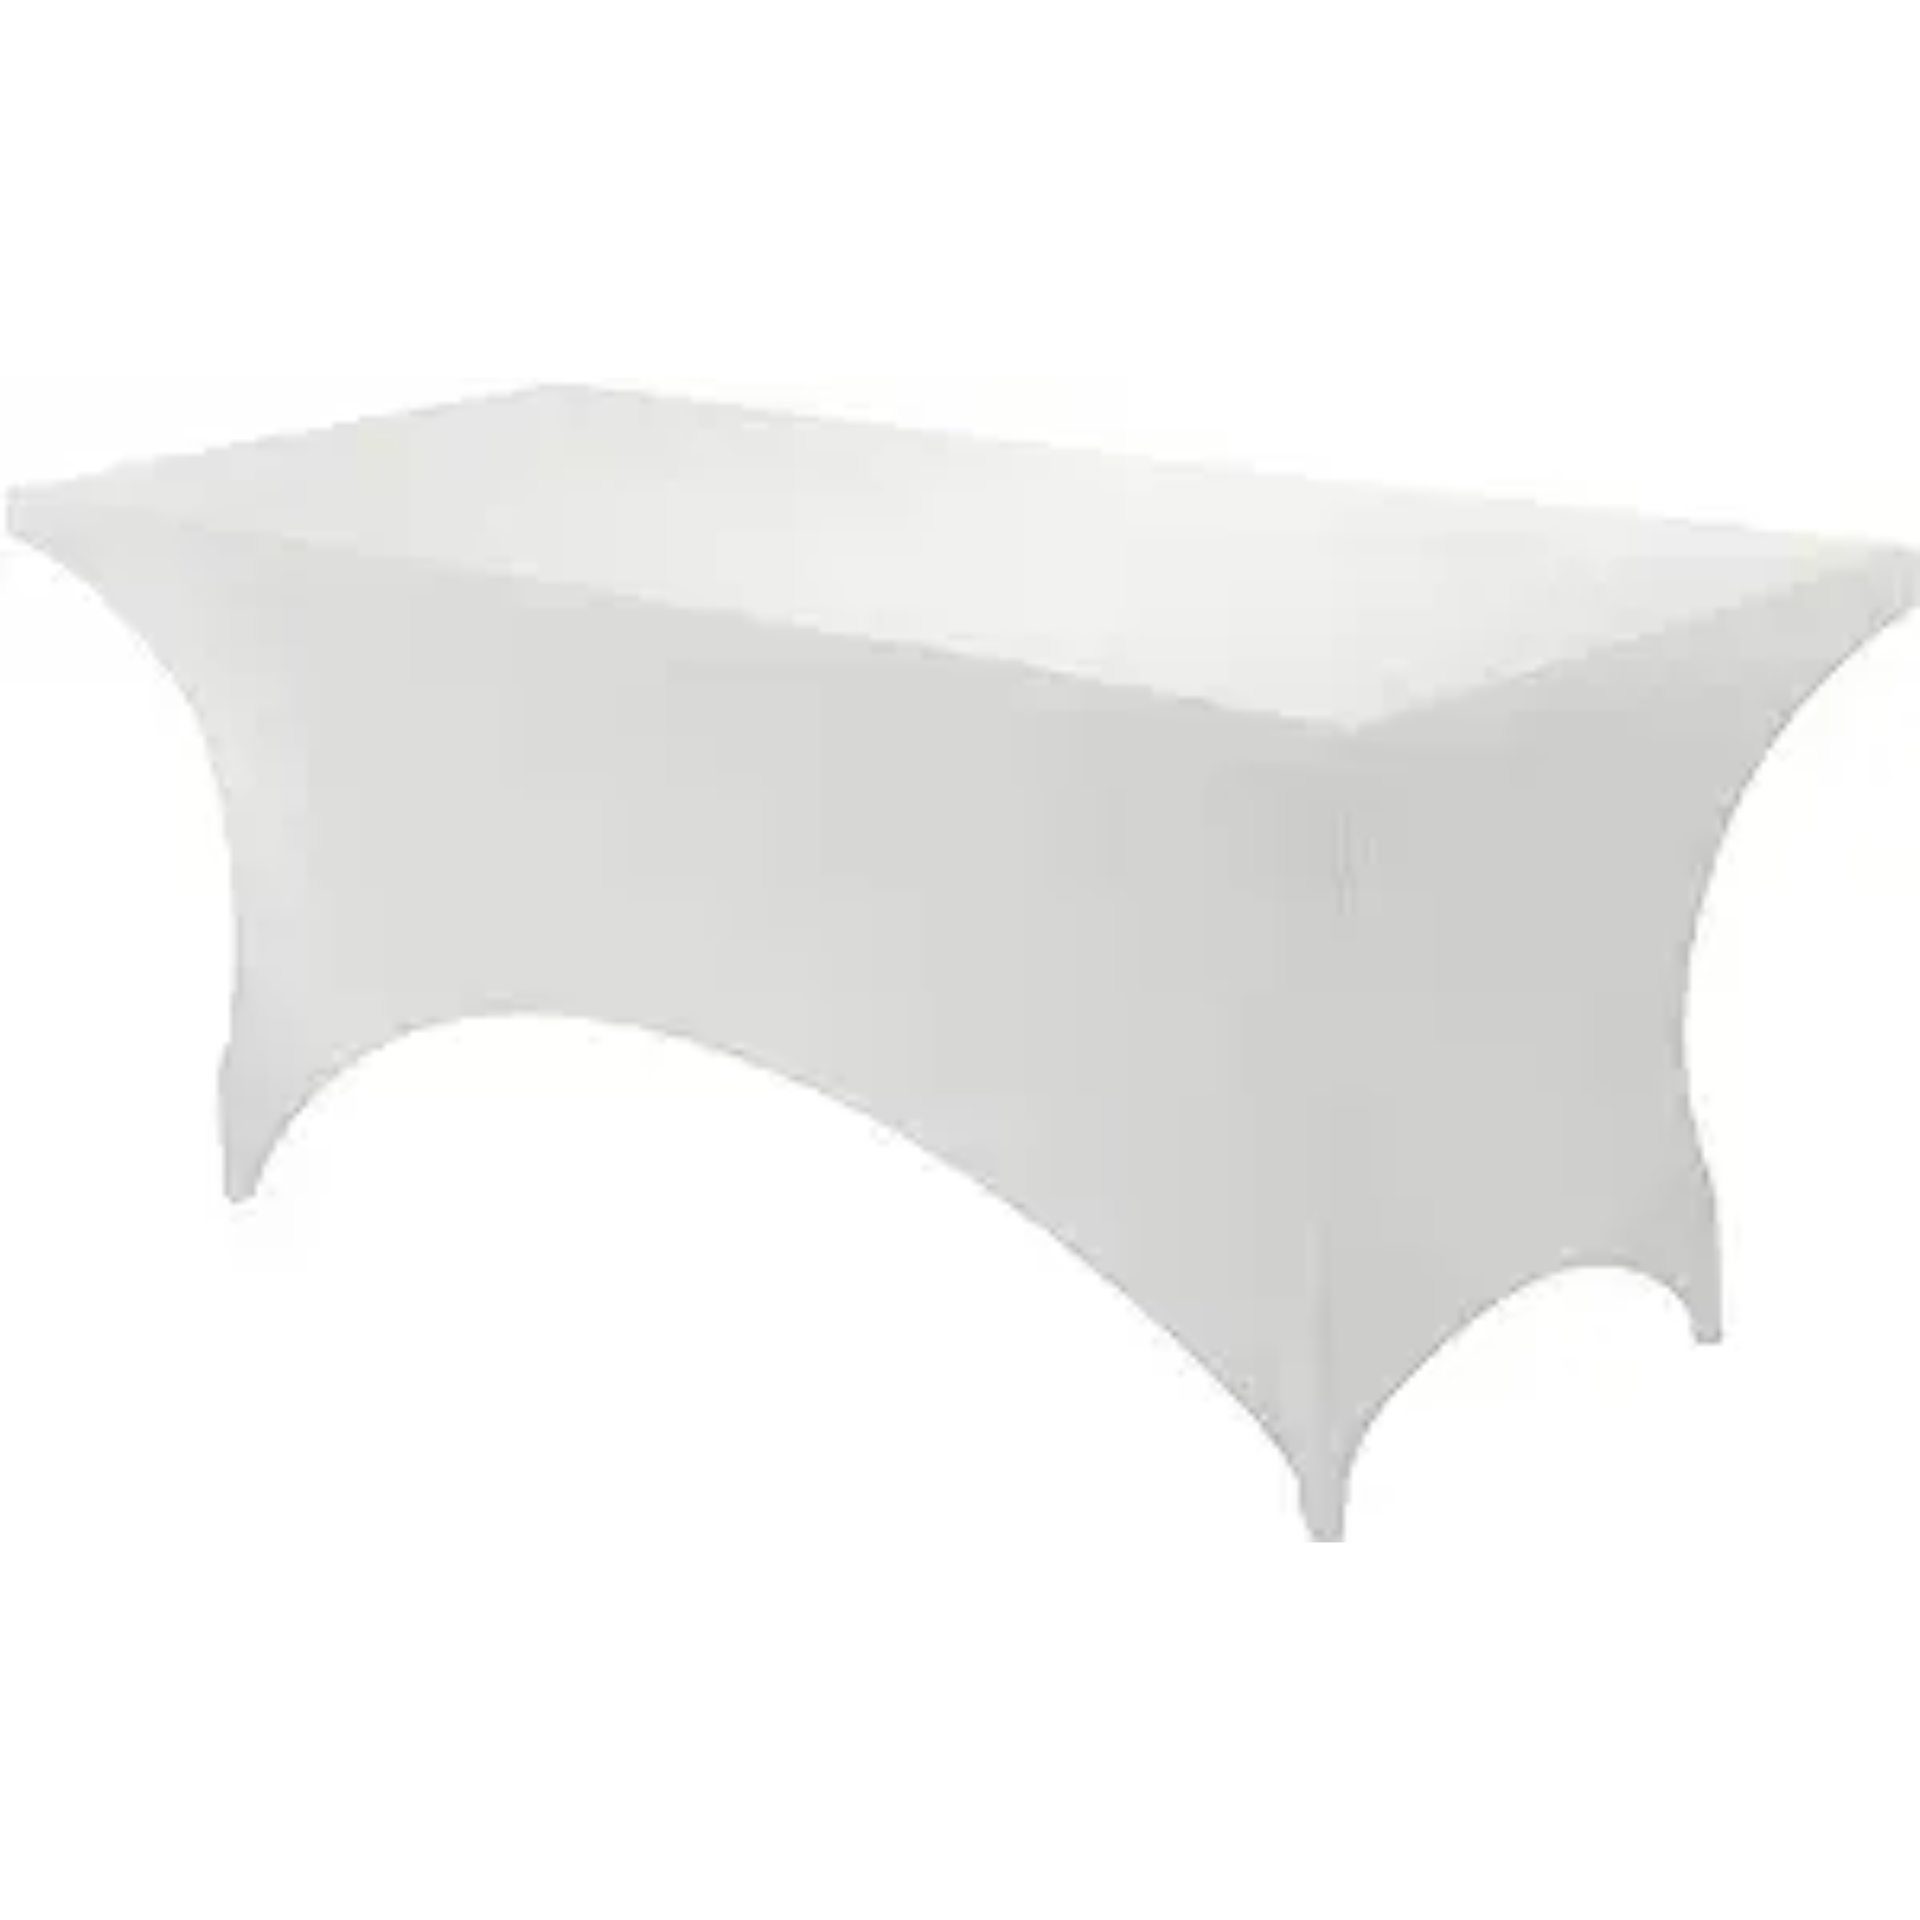 spandex white tablecloth rectangle Panama City Beach Wedding Party Event Rentals